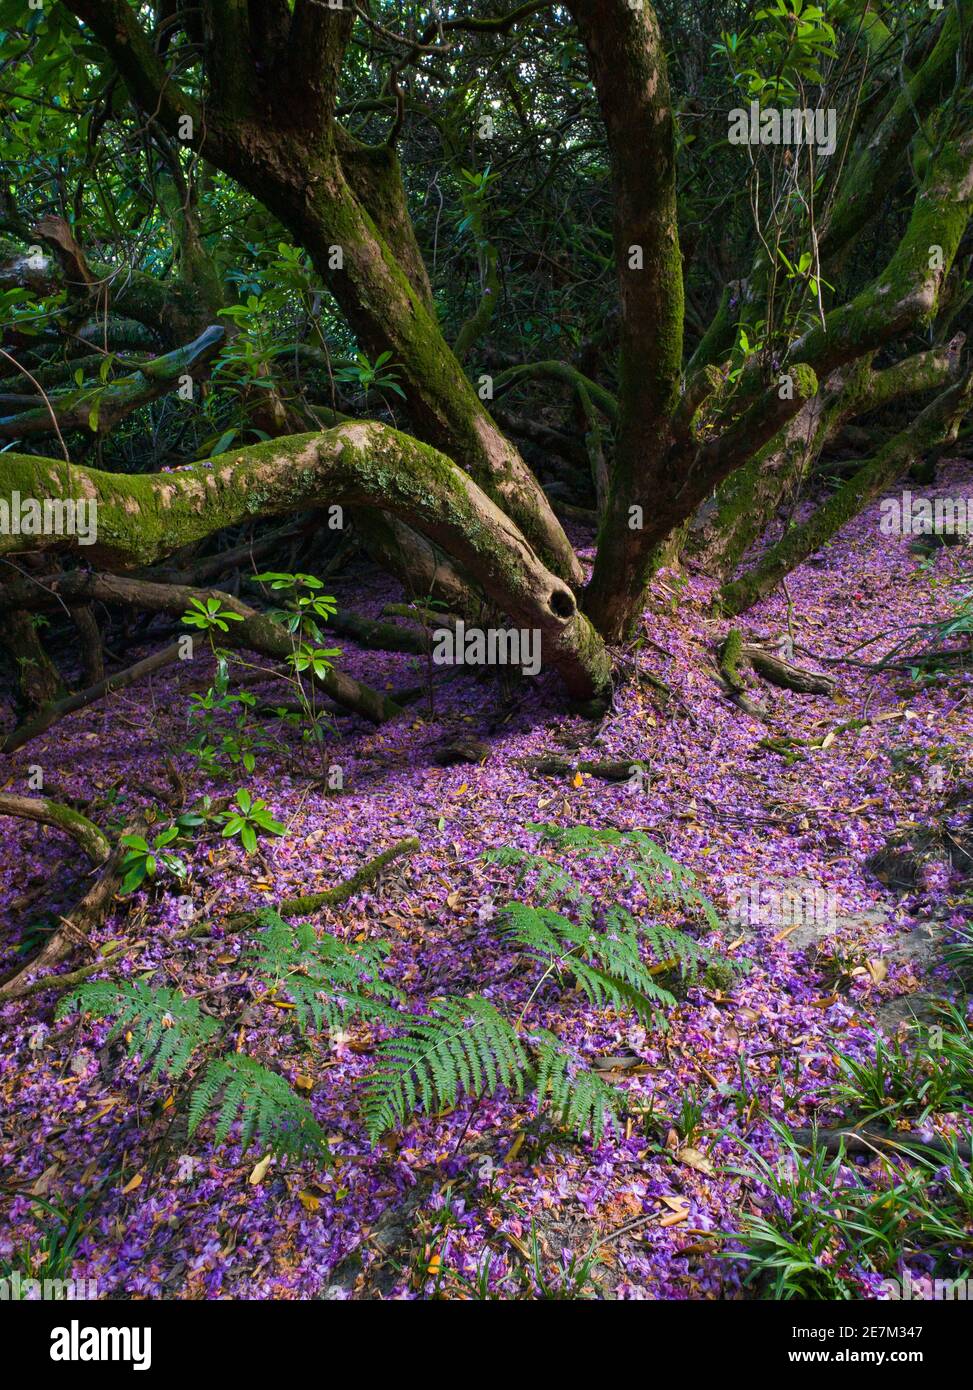 Rhododendron blossom carpets the forest floor in woodland near Kew gardens Wakehurst, Ardingly, West Sussex, England, United Kingdom. Stock Photo